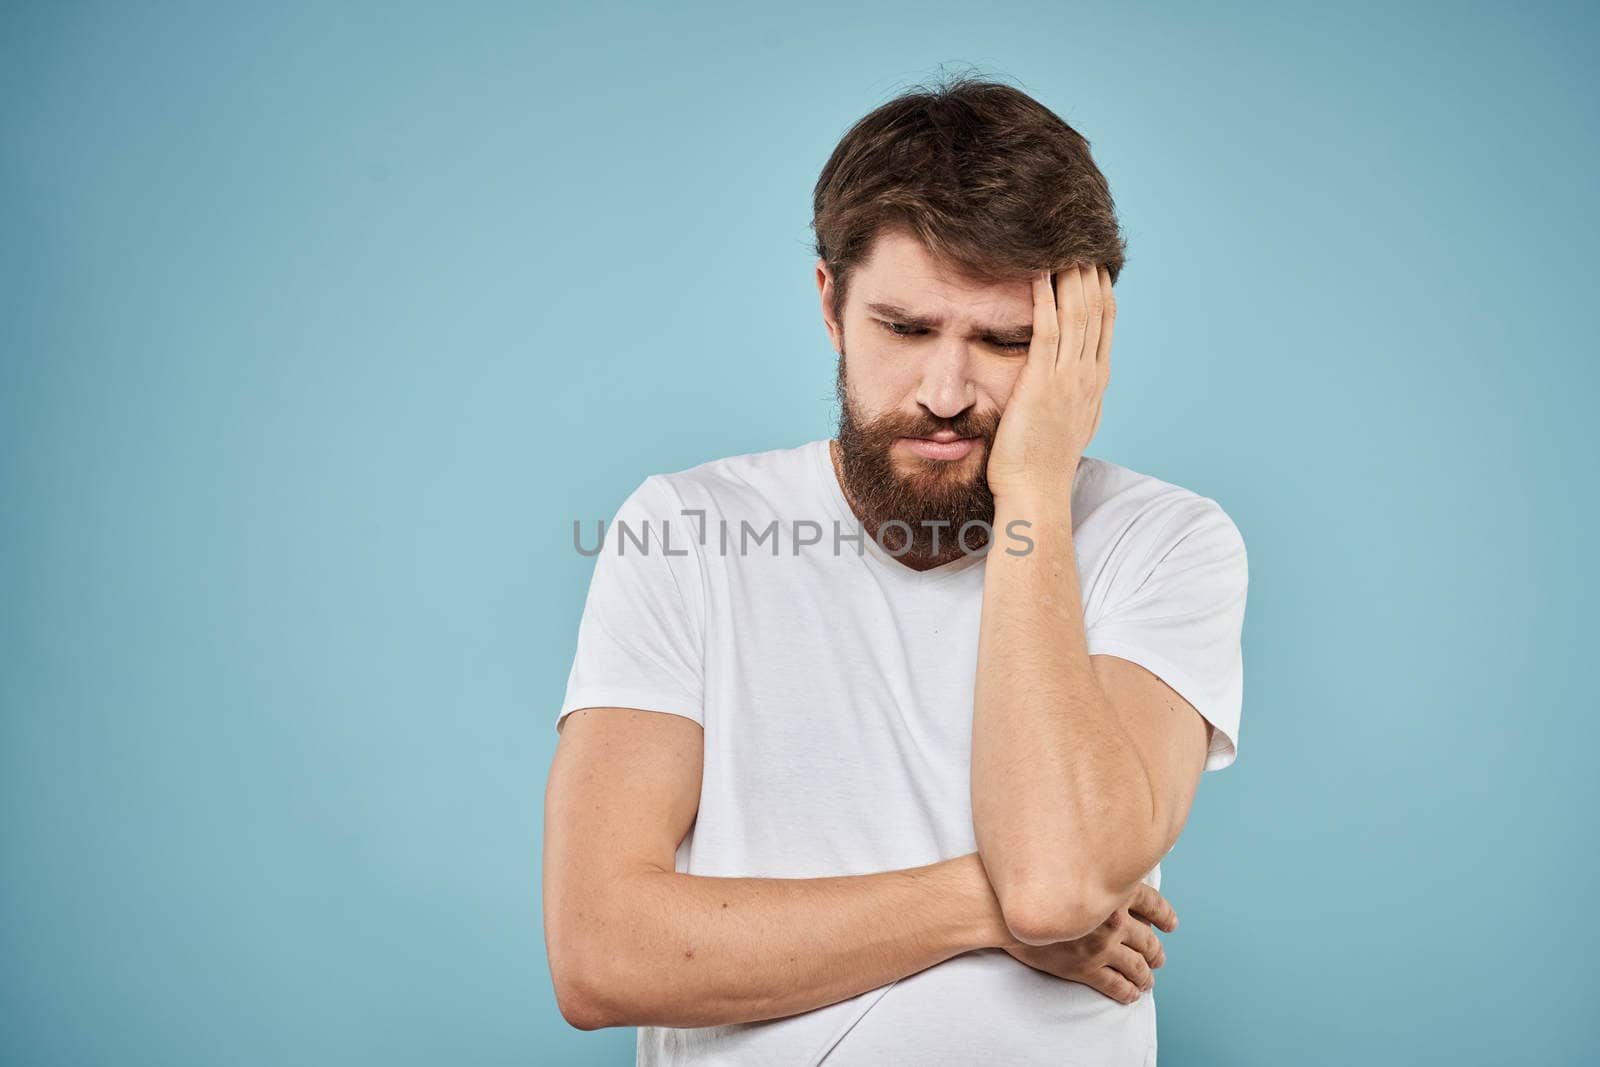 Man in white t-shirt emotions facial expression cropped view studio blue background lifestyle by SHOTPRIME